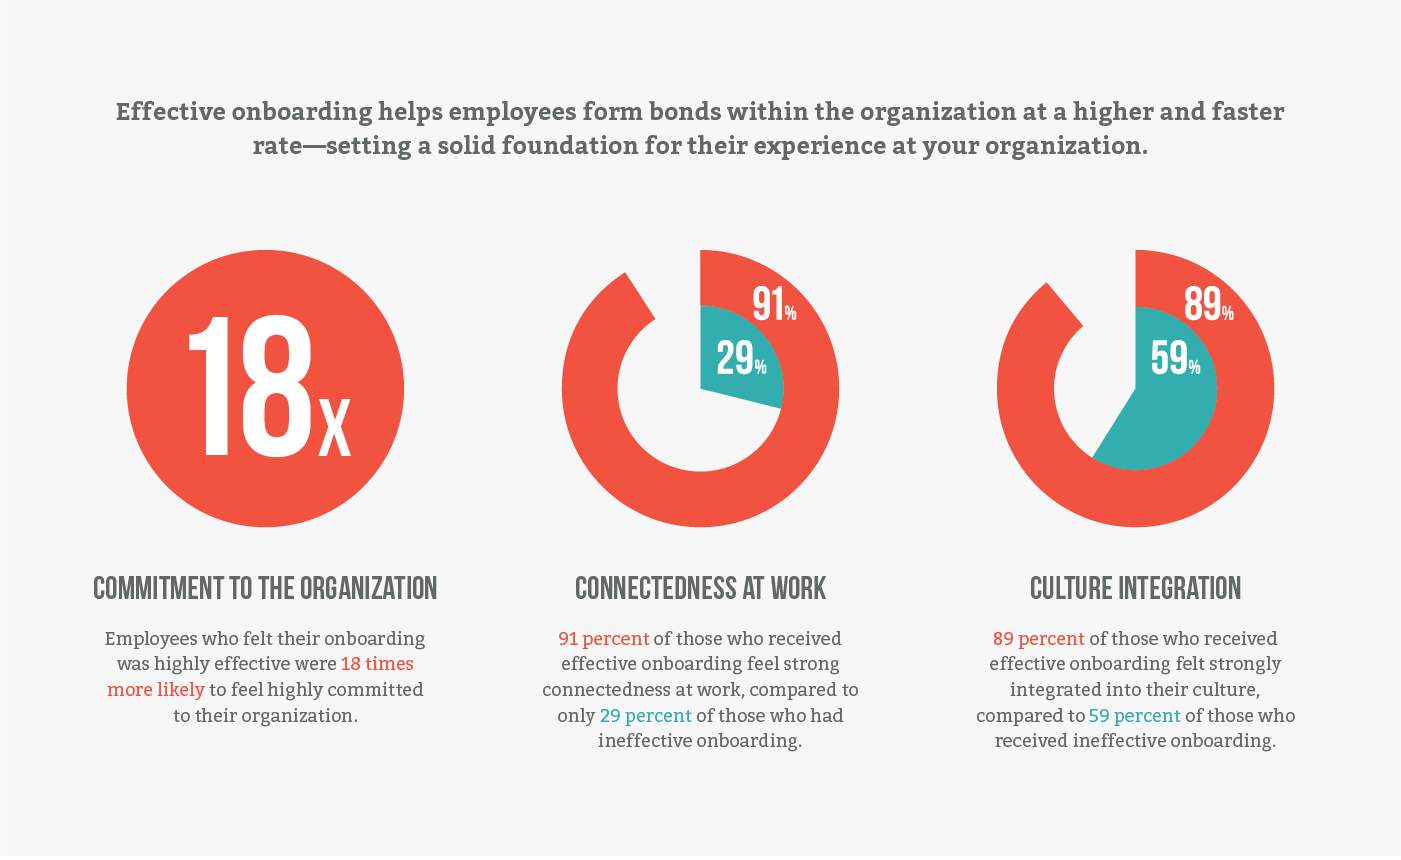 BambooHR visual on the impact of effective onboarding on new employees